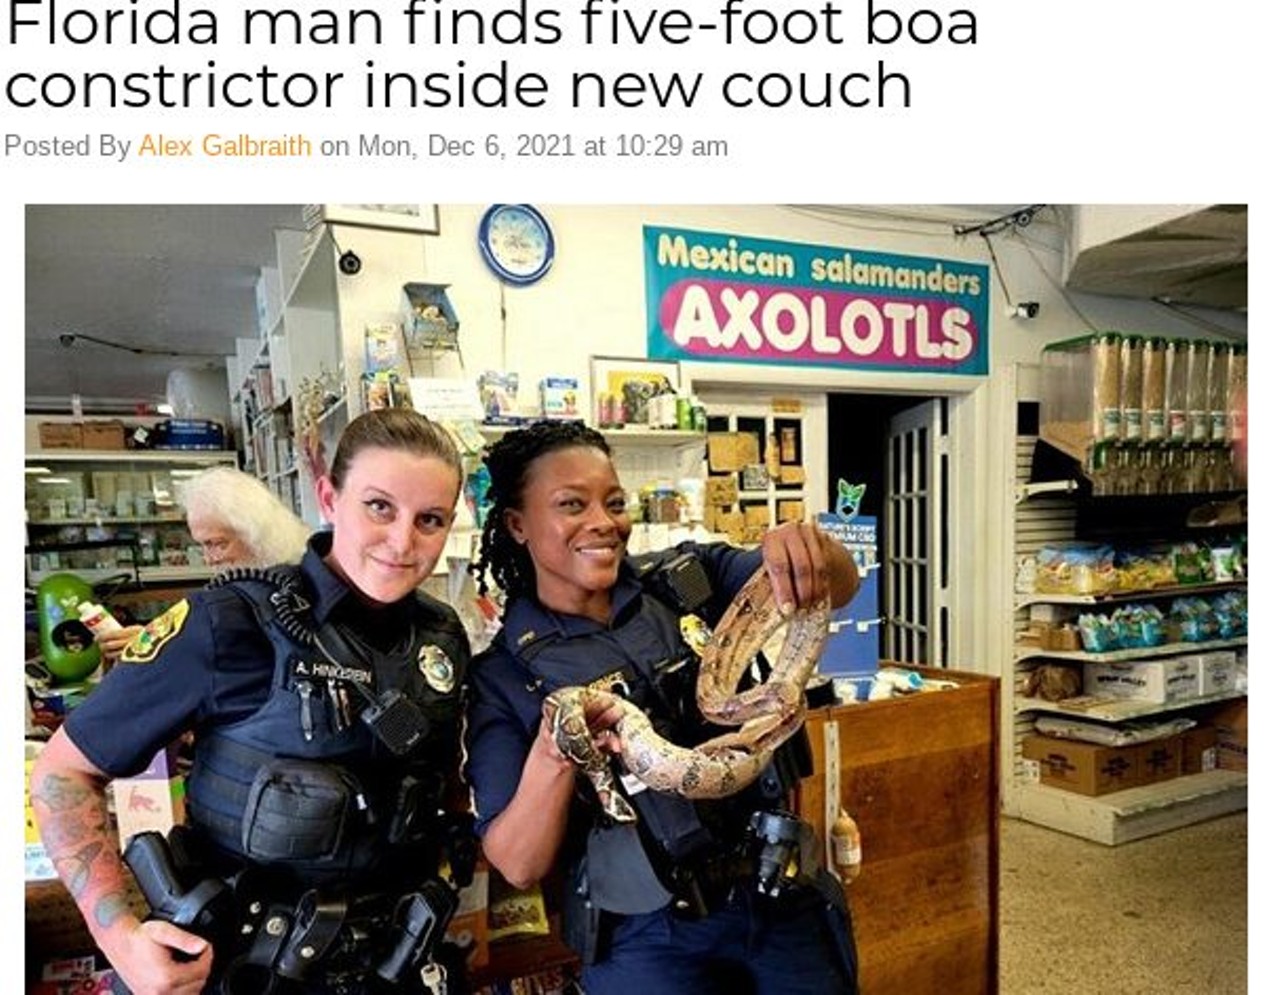 Florida man finds five-foot boa constrictor inside new couch
